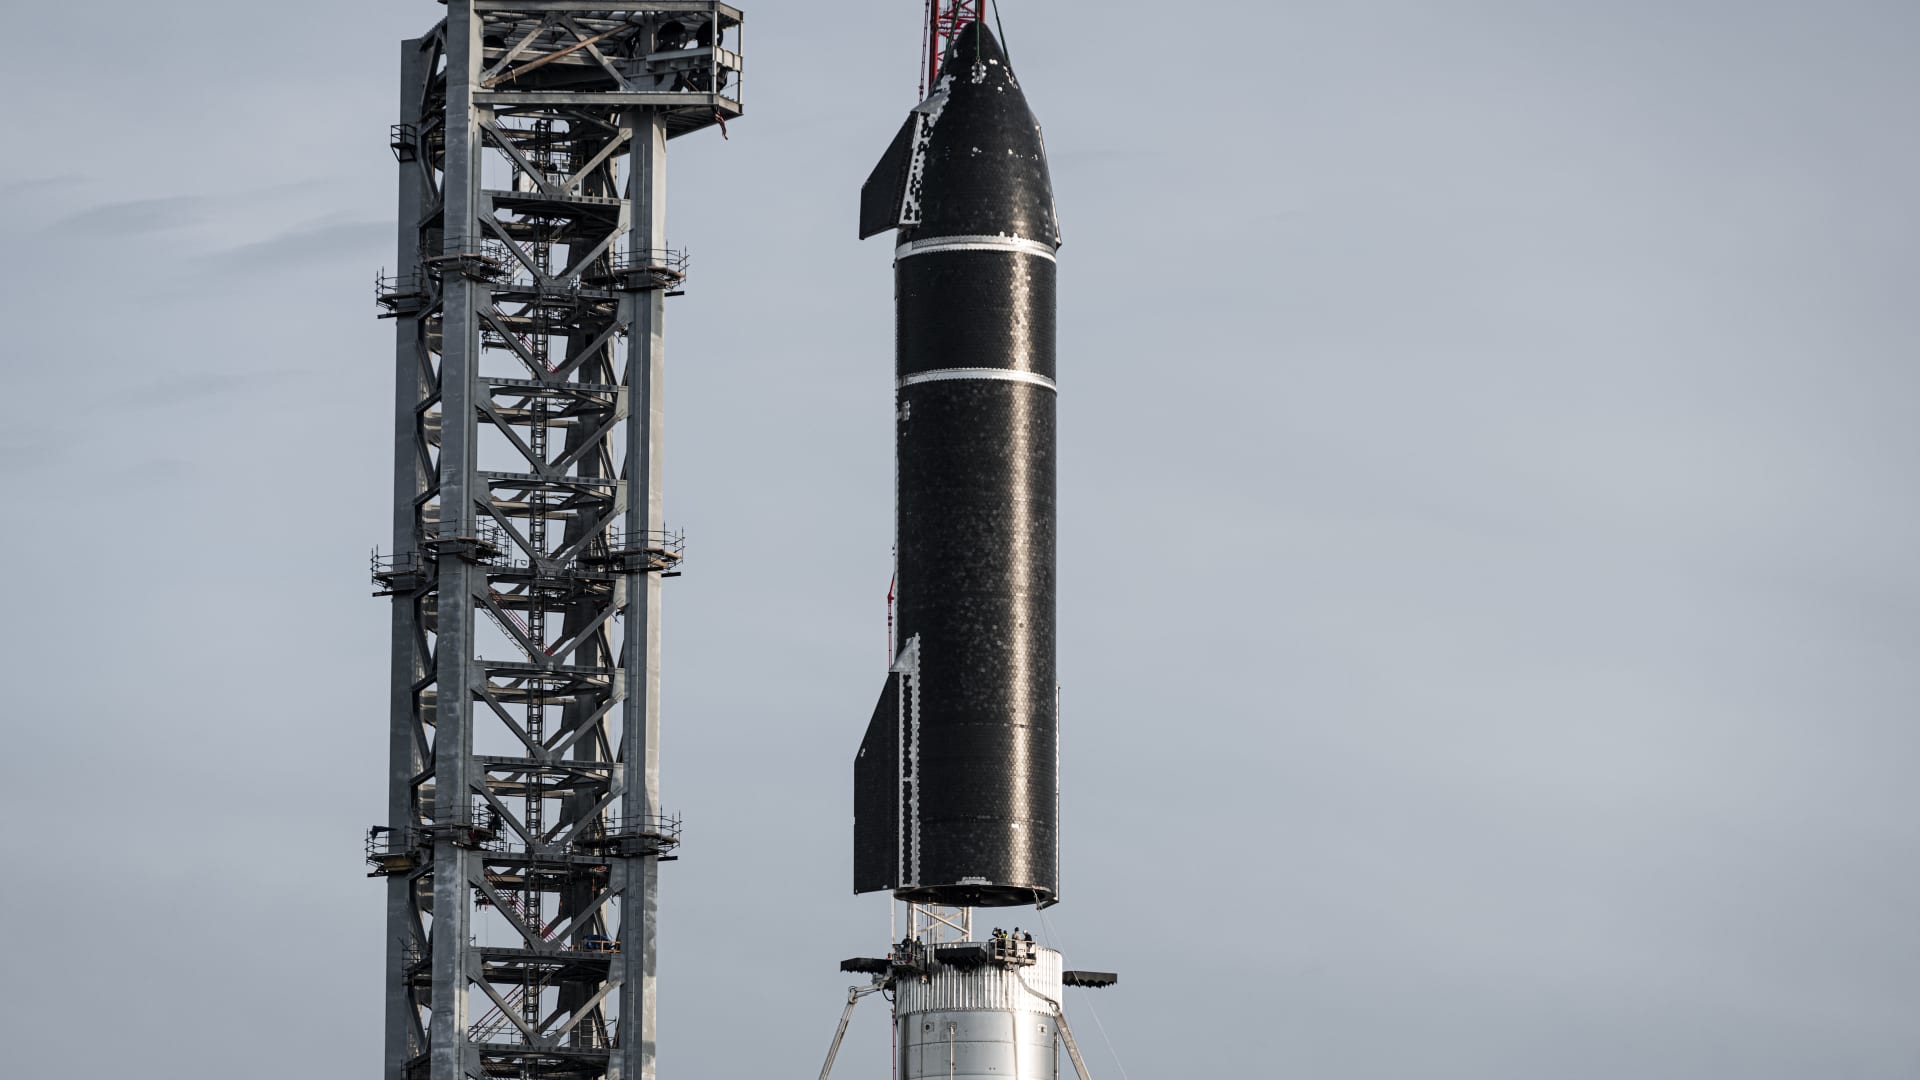 Starship prototype 20 is stacked on top of Super Heavy Booster 4 on August 6, 2021.